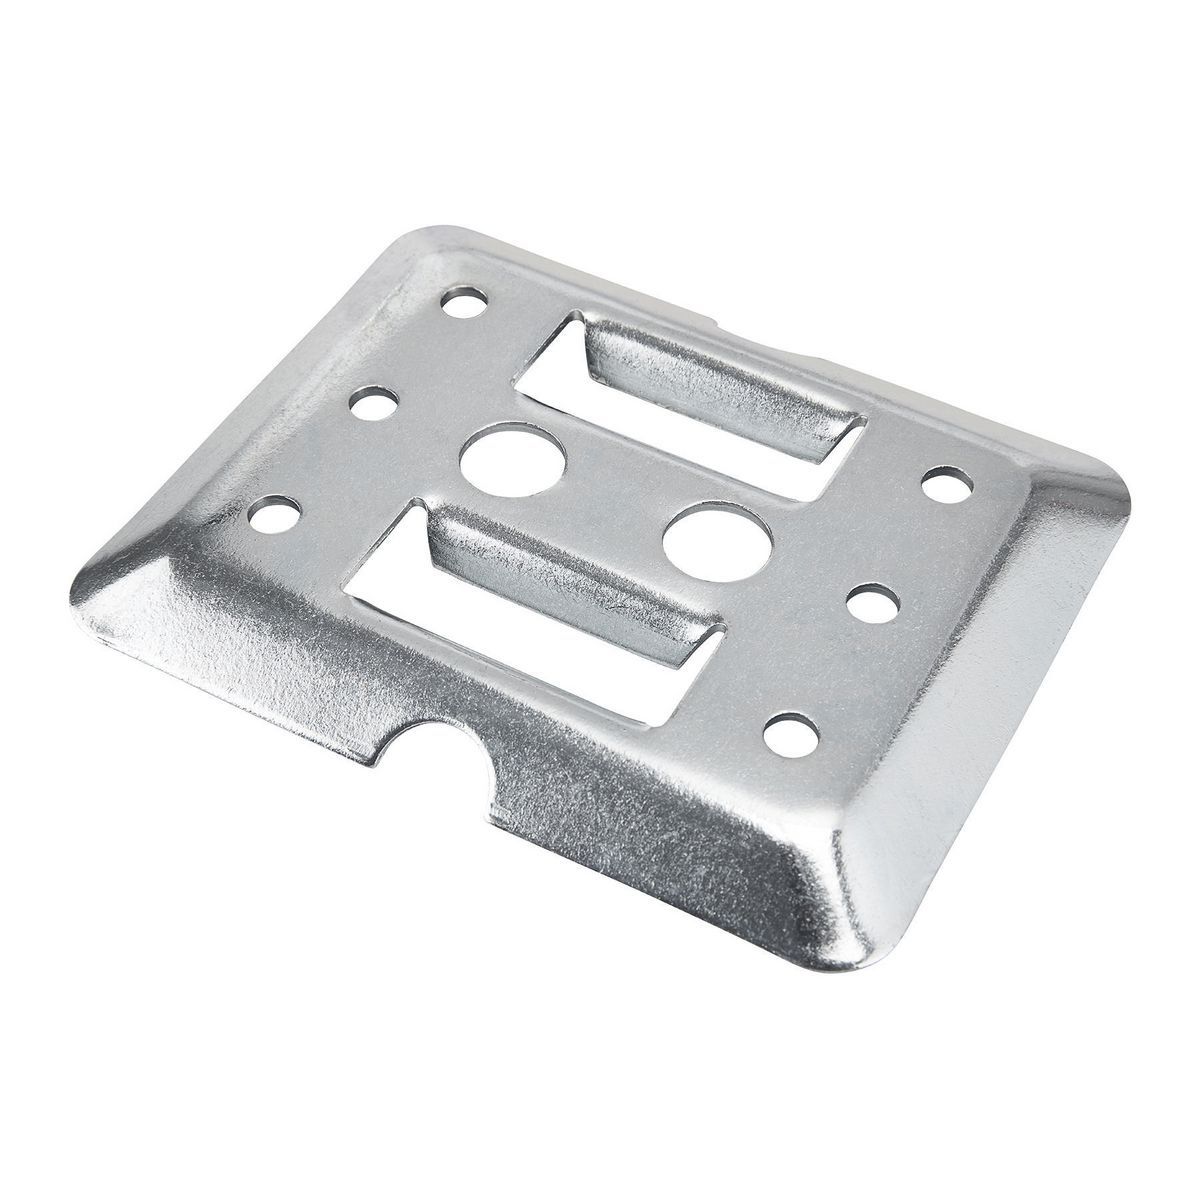 HAUL-MASTER E-track Mounting Plate